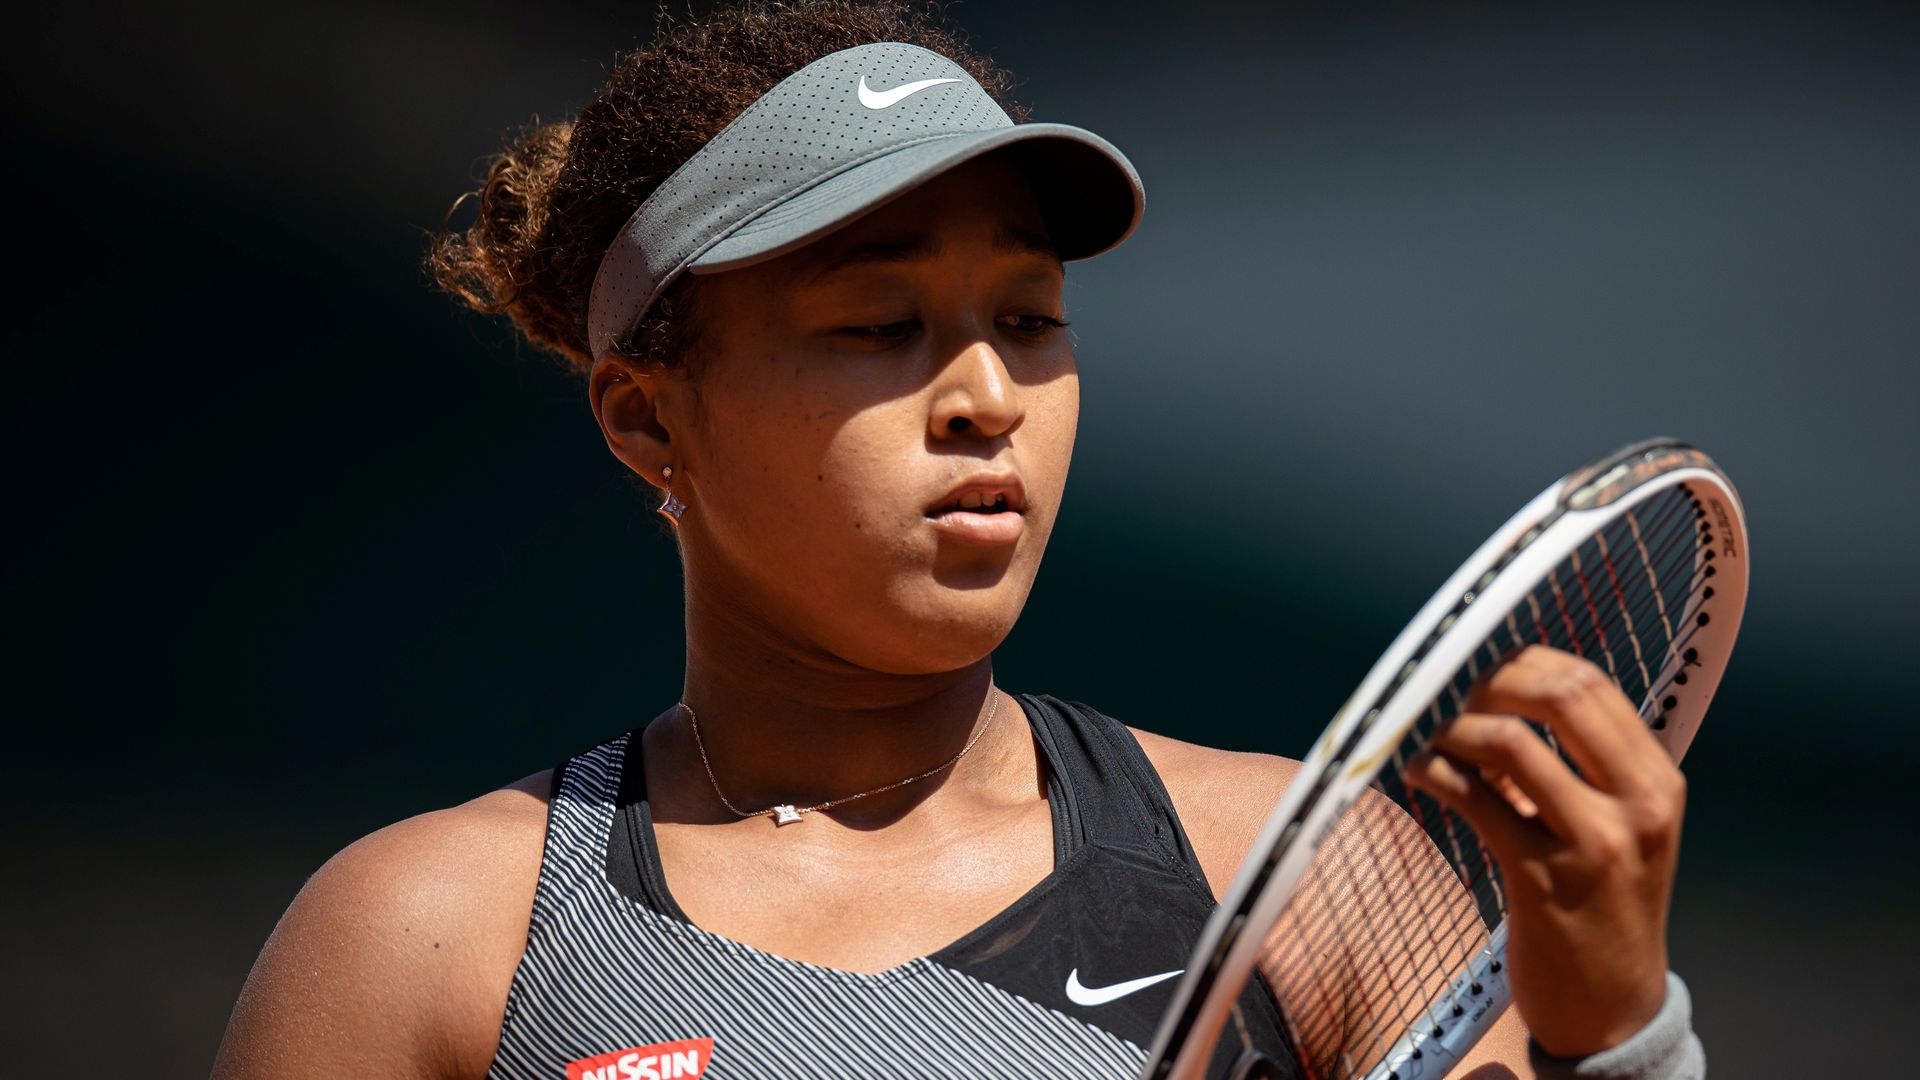 These Photos of Naomi Osaka and Her Family Are Even Better Than a